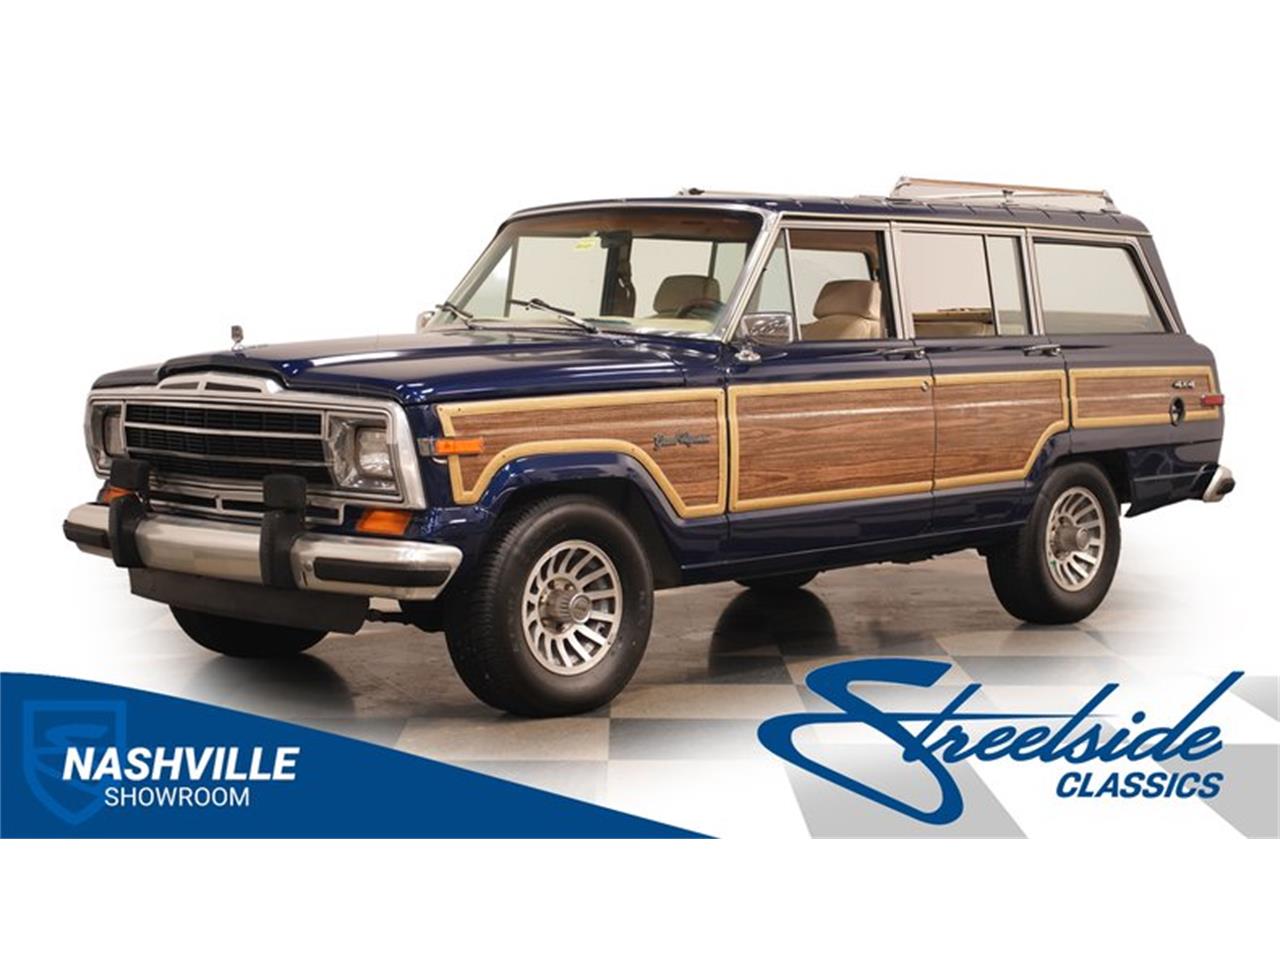 For Sale: 1989 Jeep Grand Wagoneer in Lavergne, Tennessee for sale in La Vergne, TN